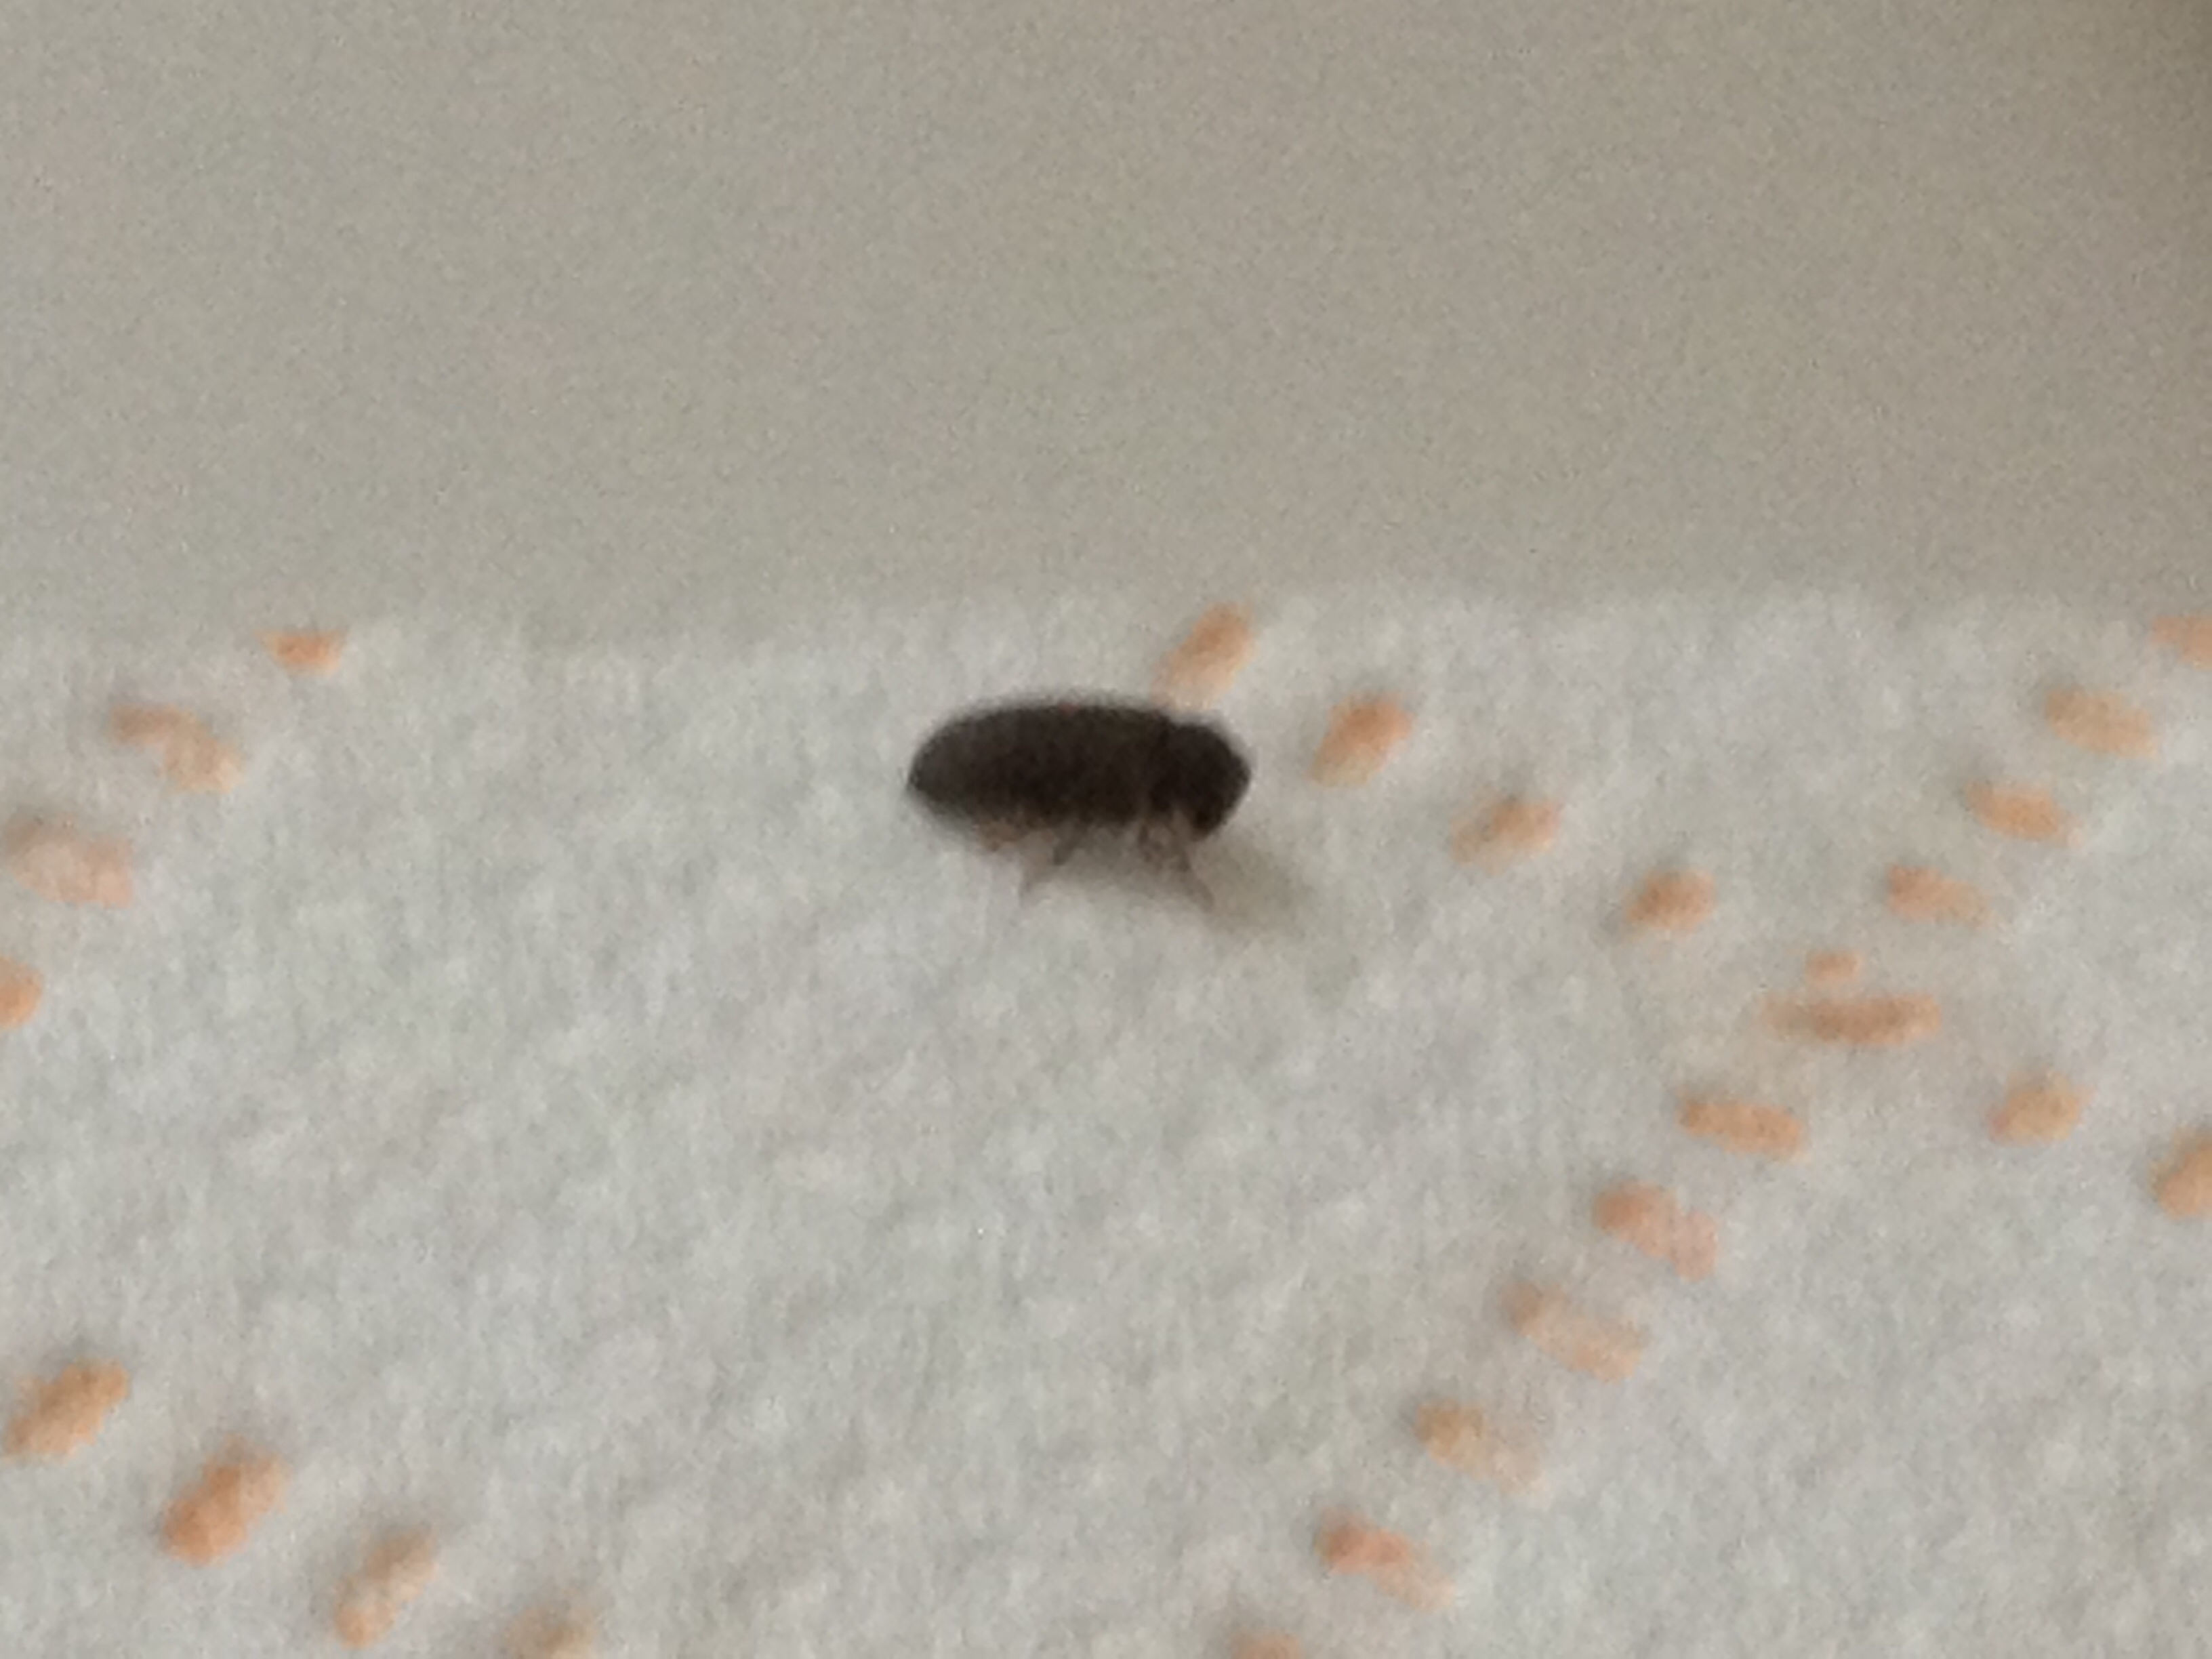 NaturePlus: Please help me identify tiny black bugs found in bathroom-  really worried incase it causes any damage or if it's harmless!